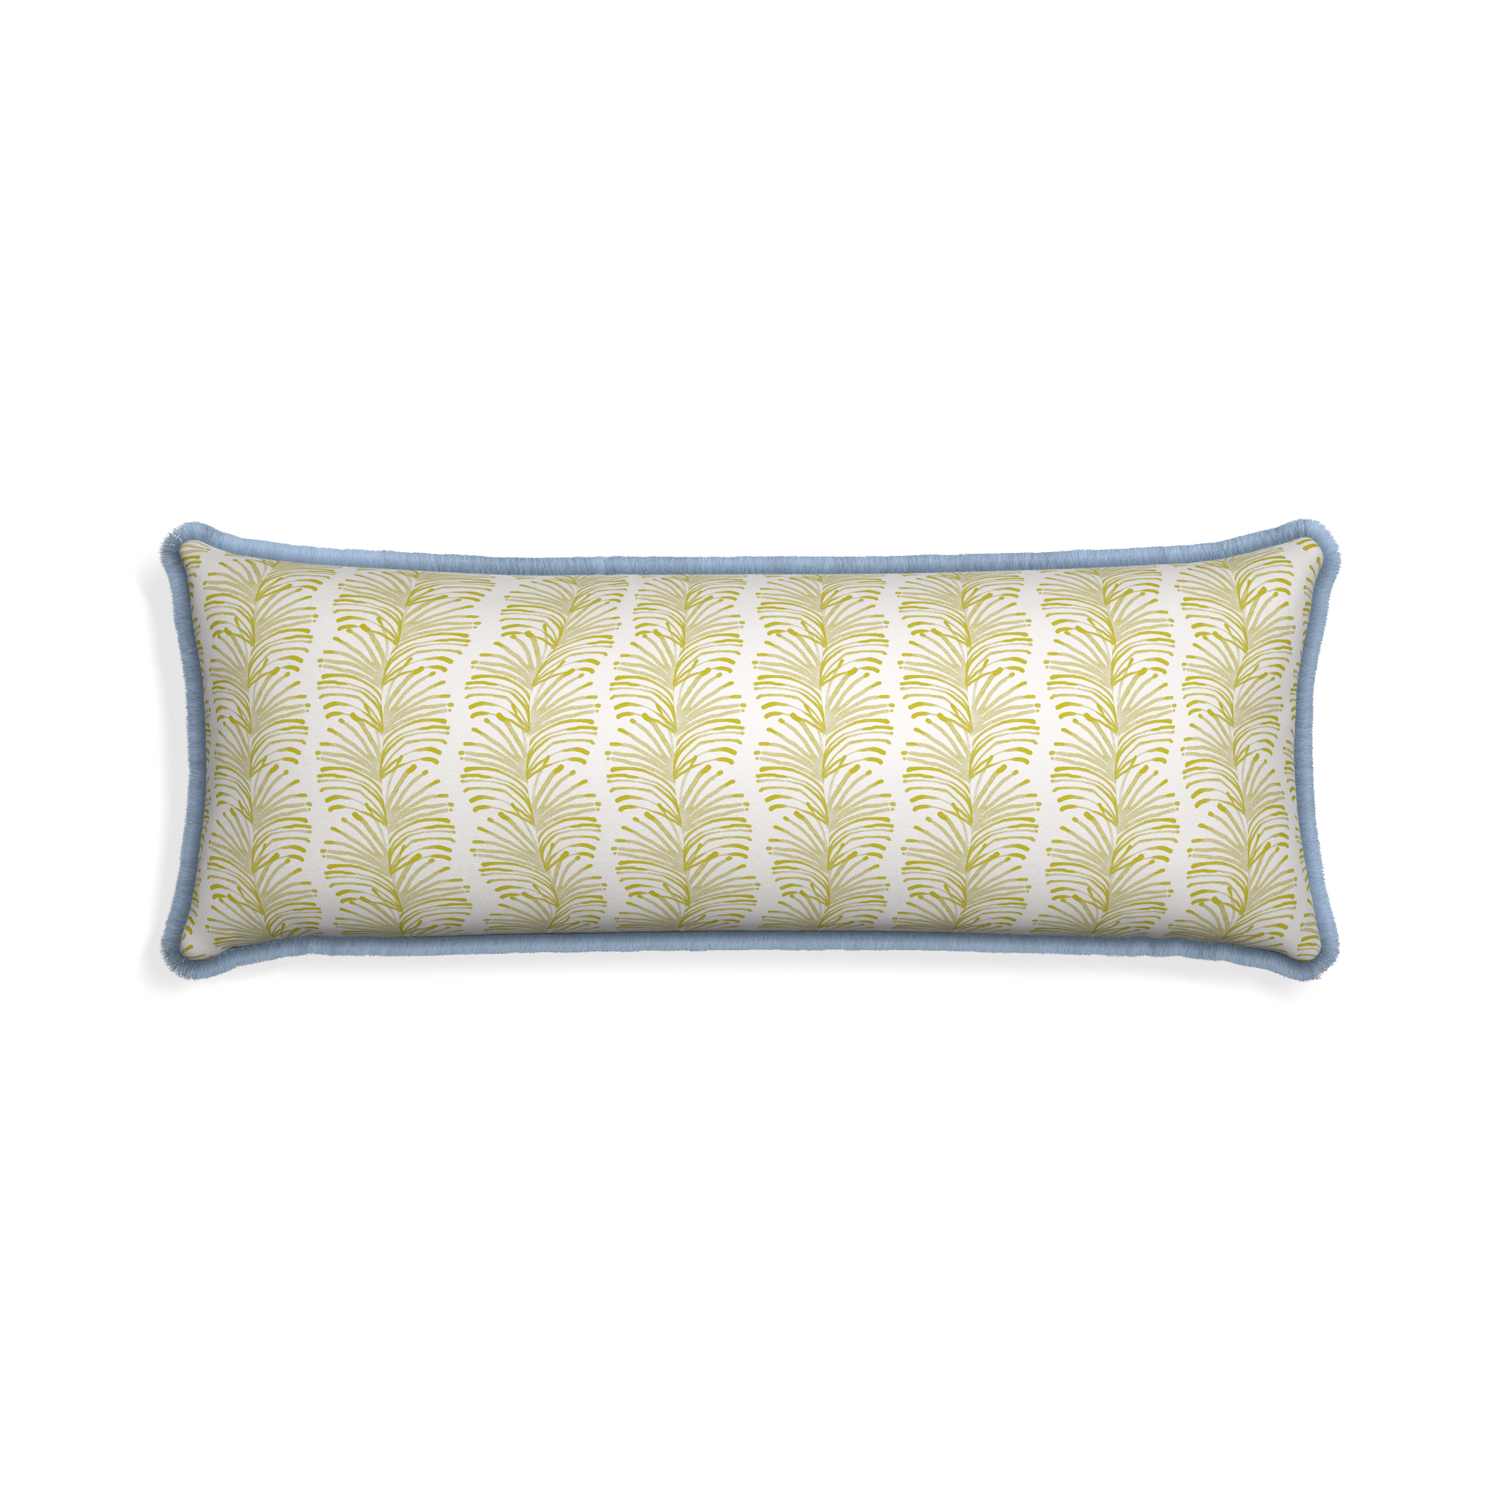 Xl-lumbar emma chartreuse custom pillow with sky fringe on white background